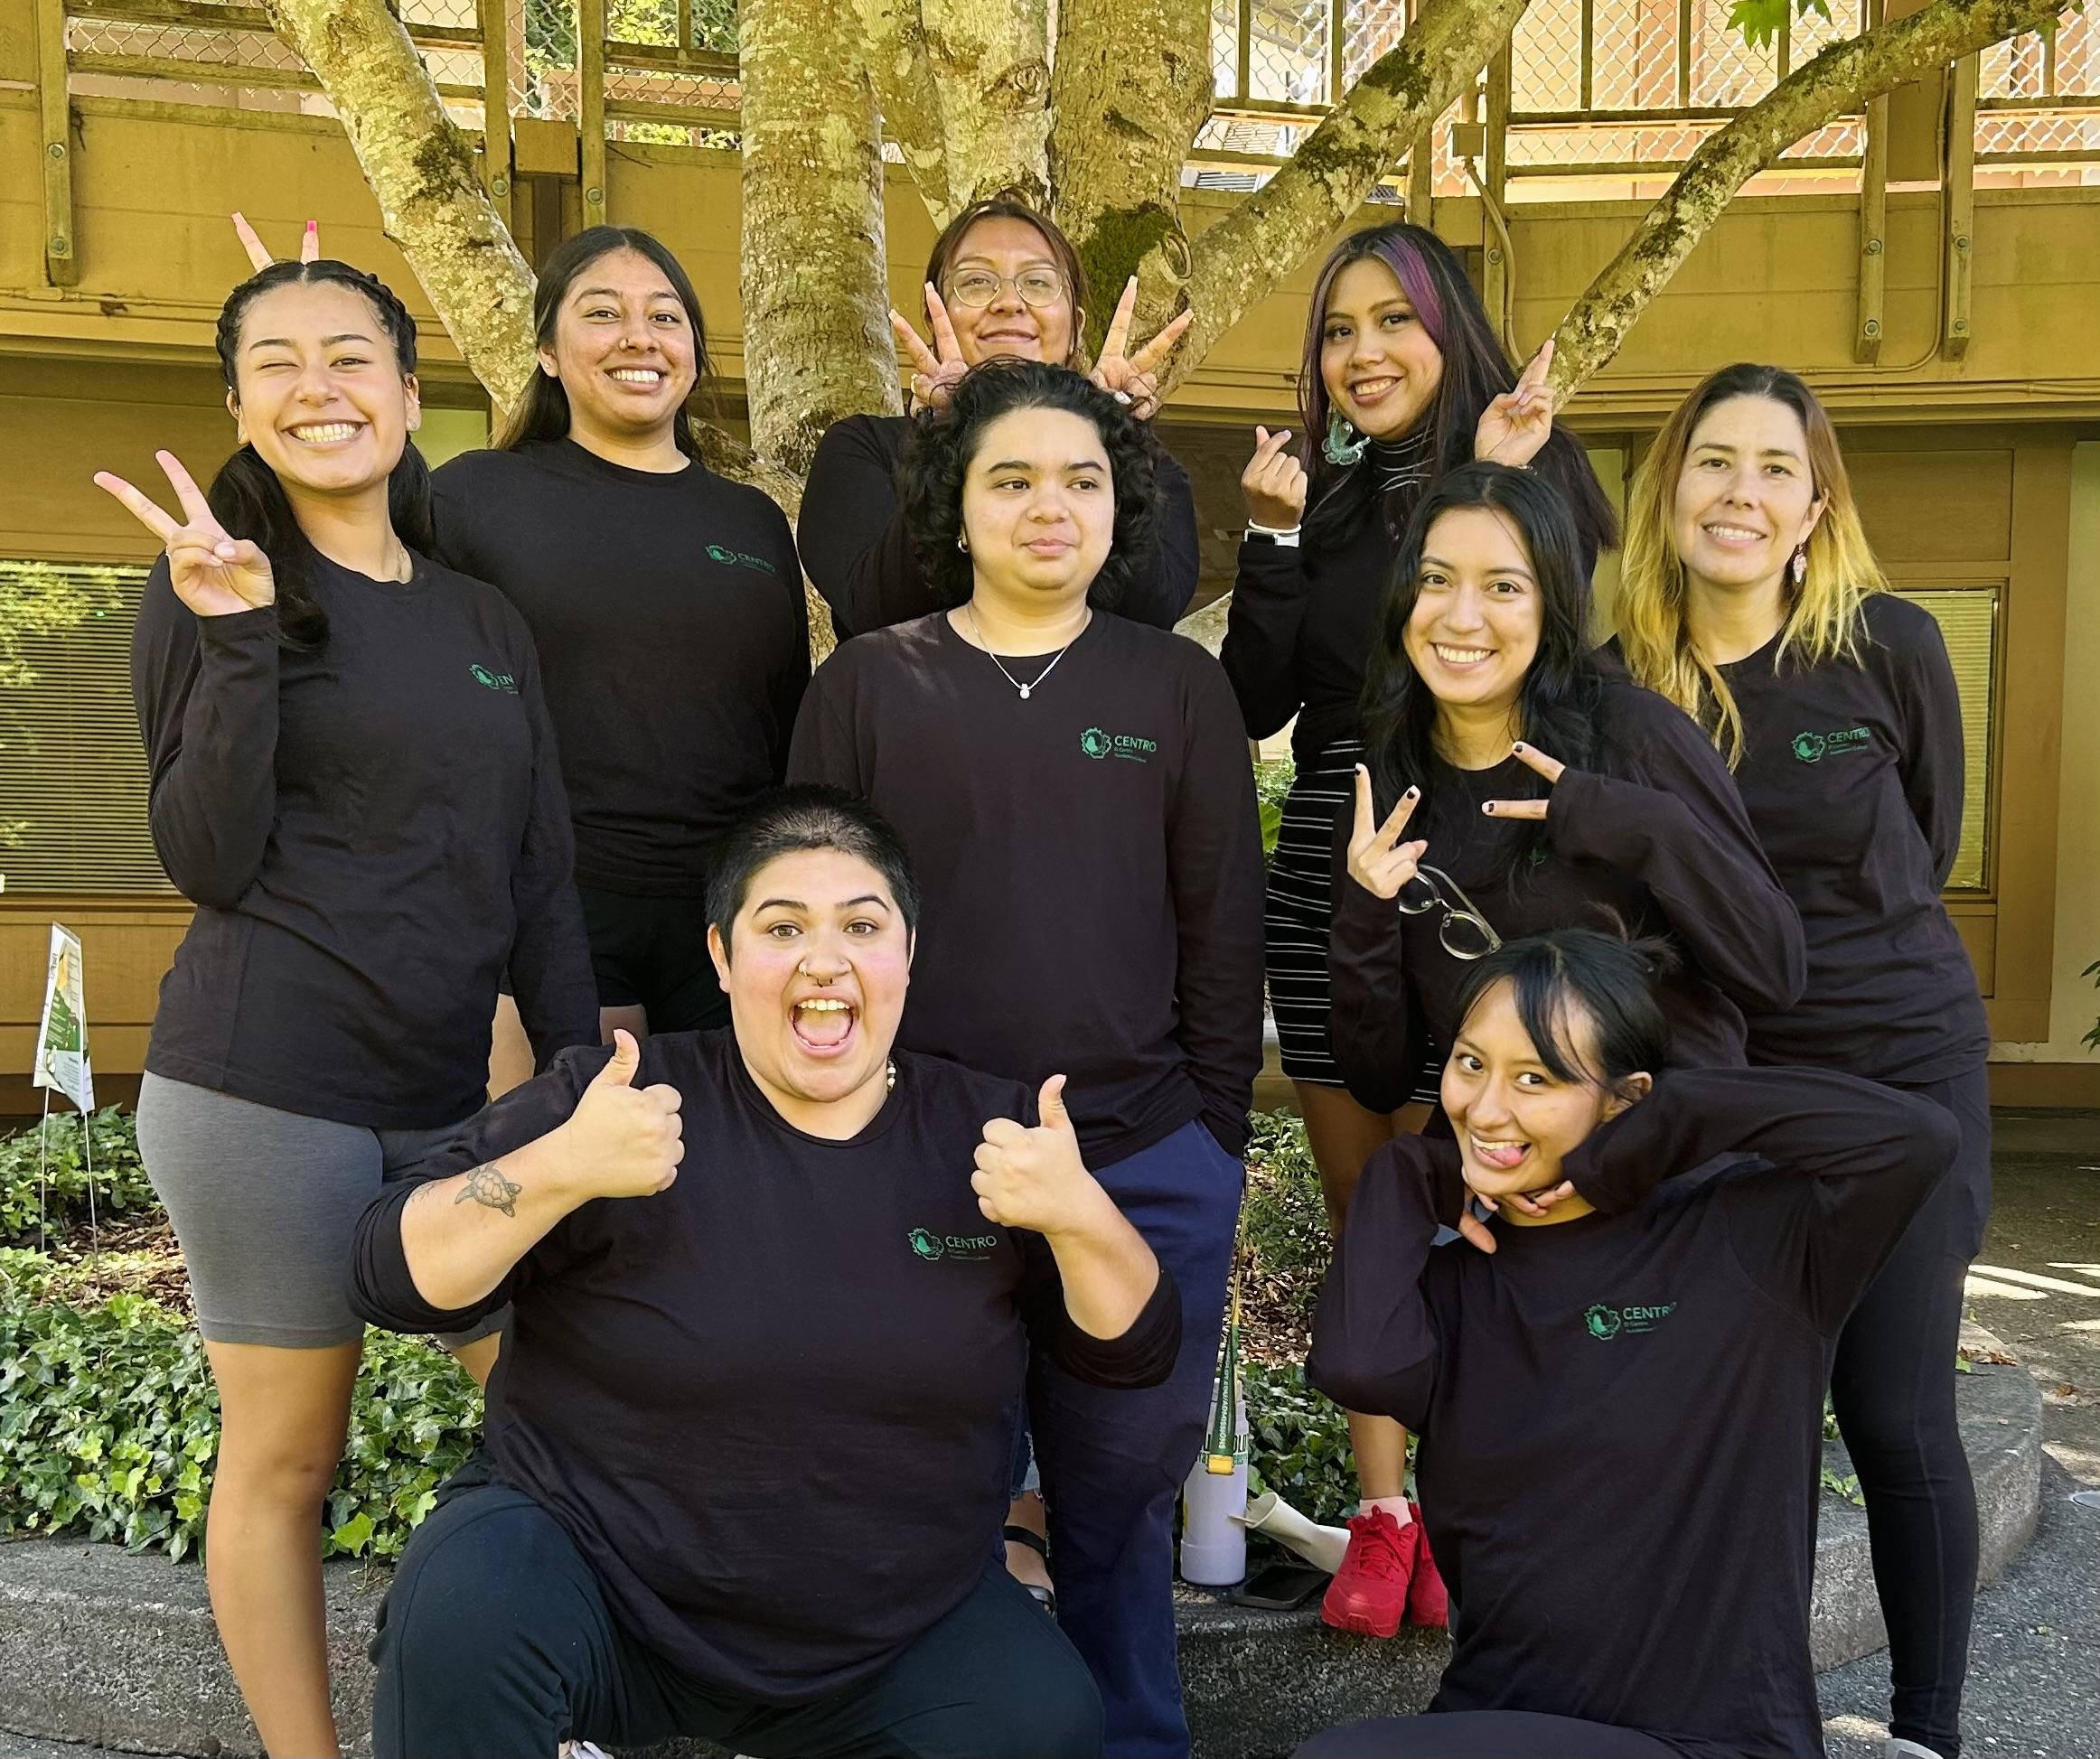 Image of el centro staff making funny faces. 